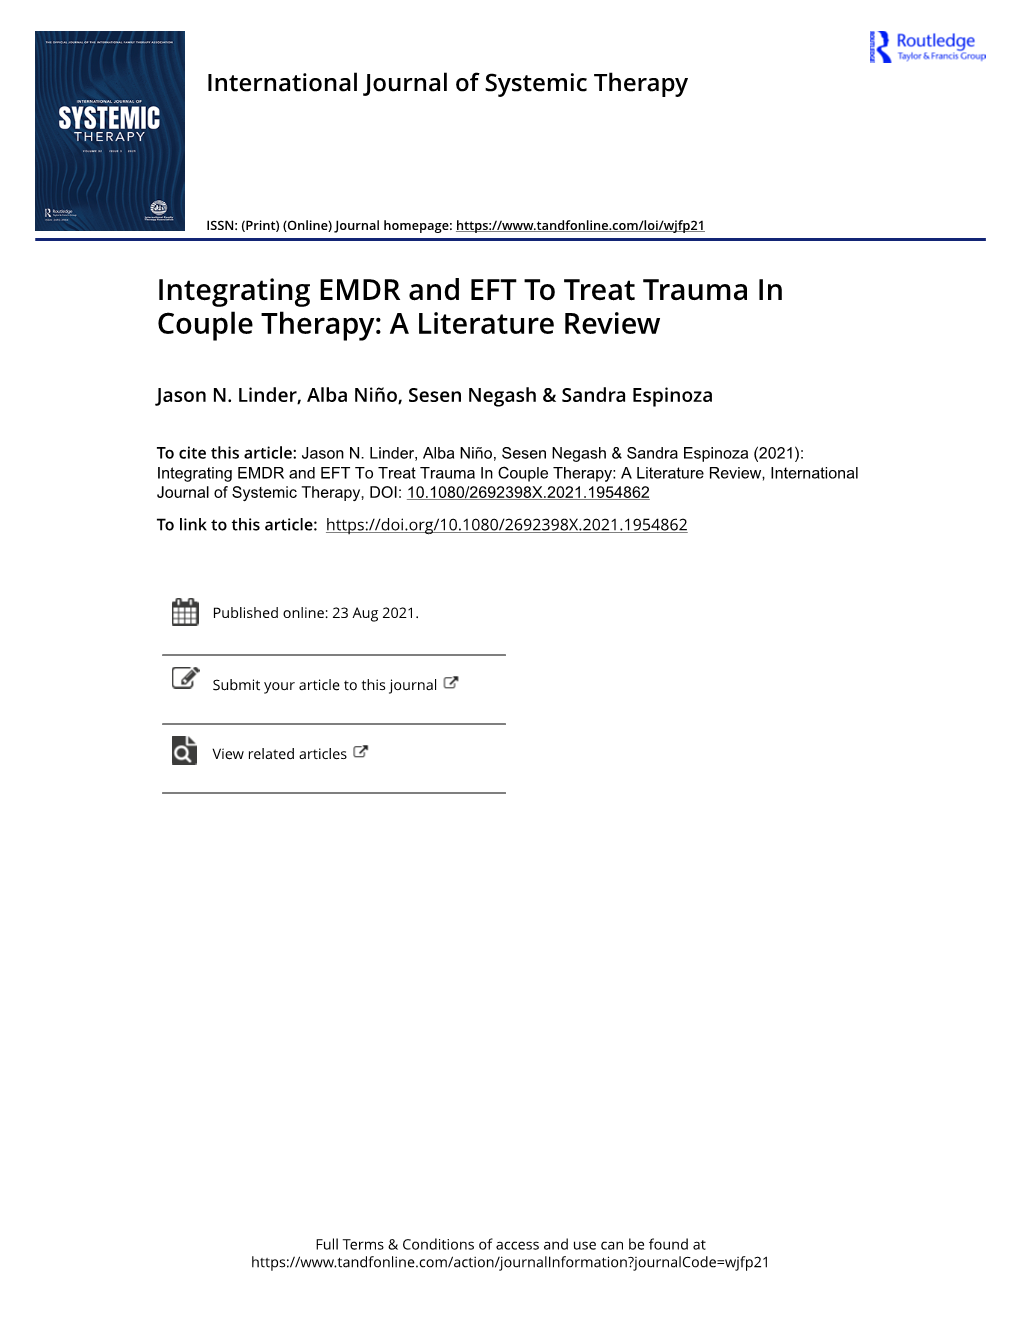 Integrating EMDR and EFT to Treat Trauma in Couple Therapy: a Literature Review